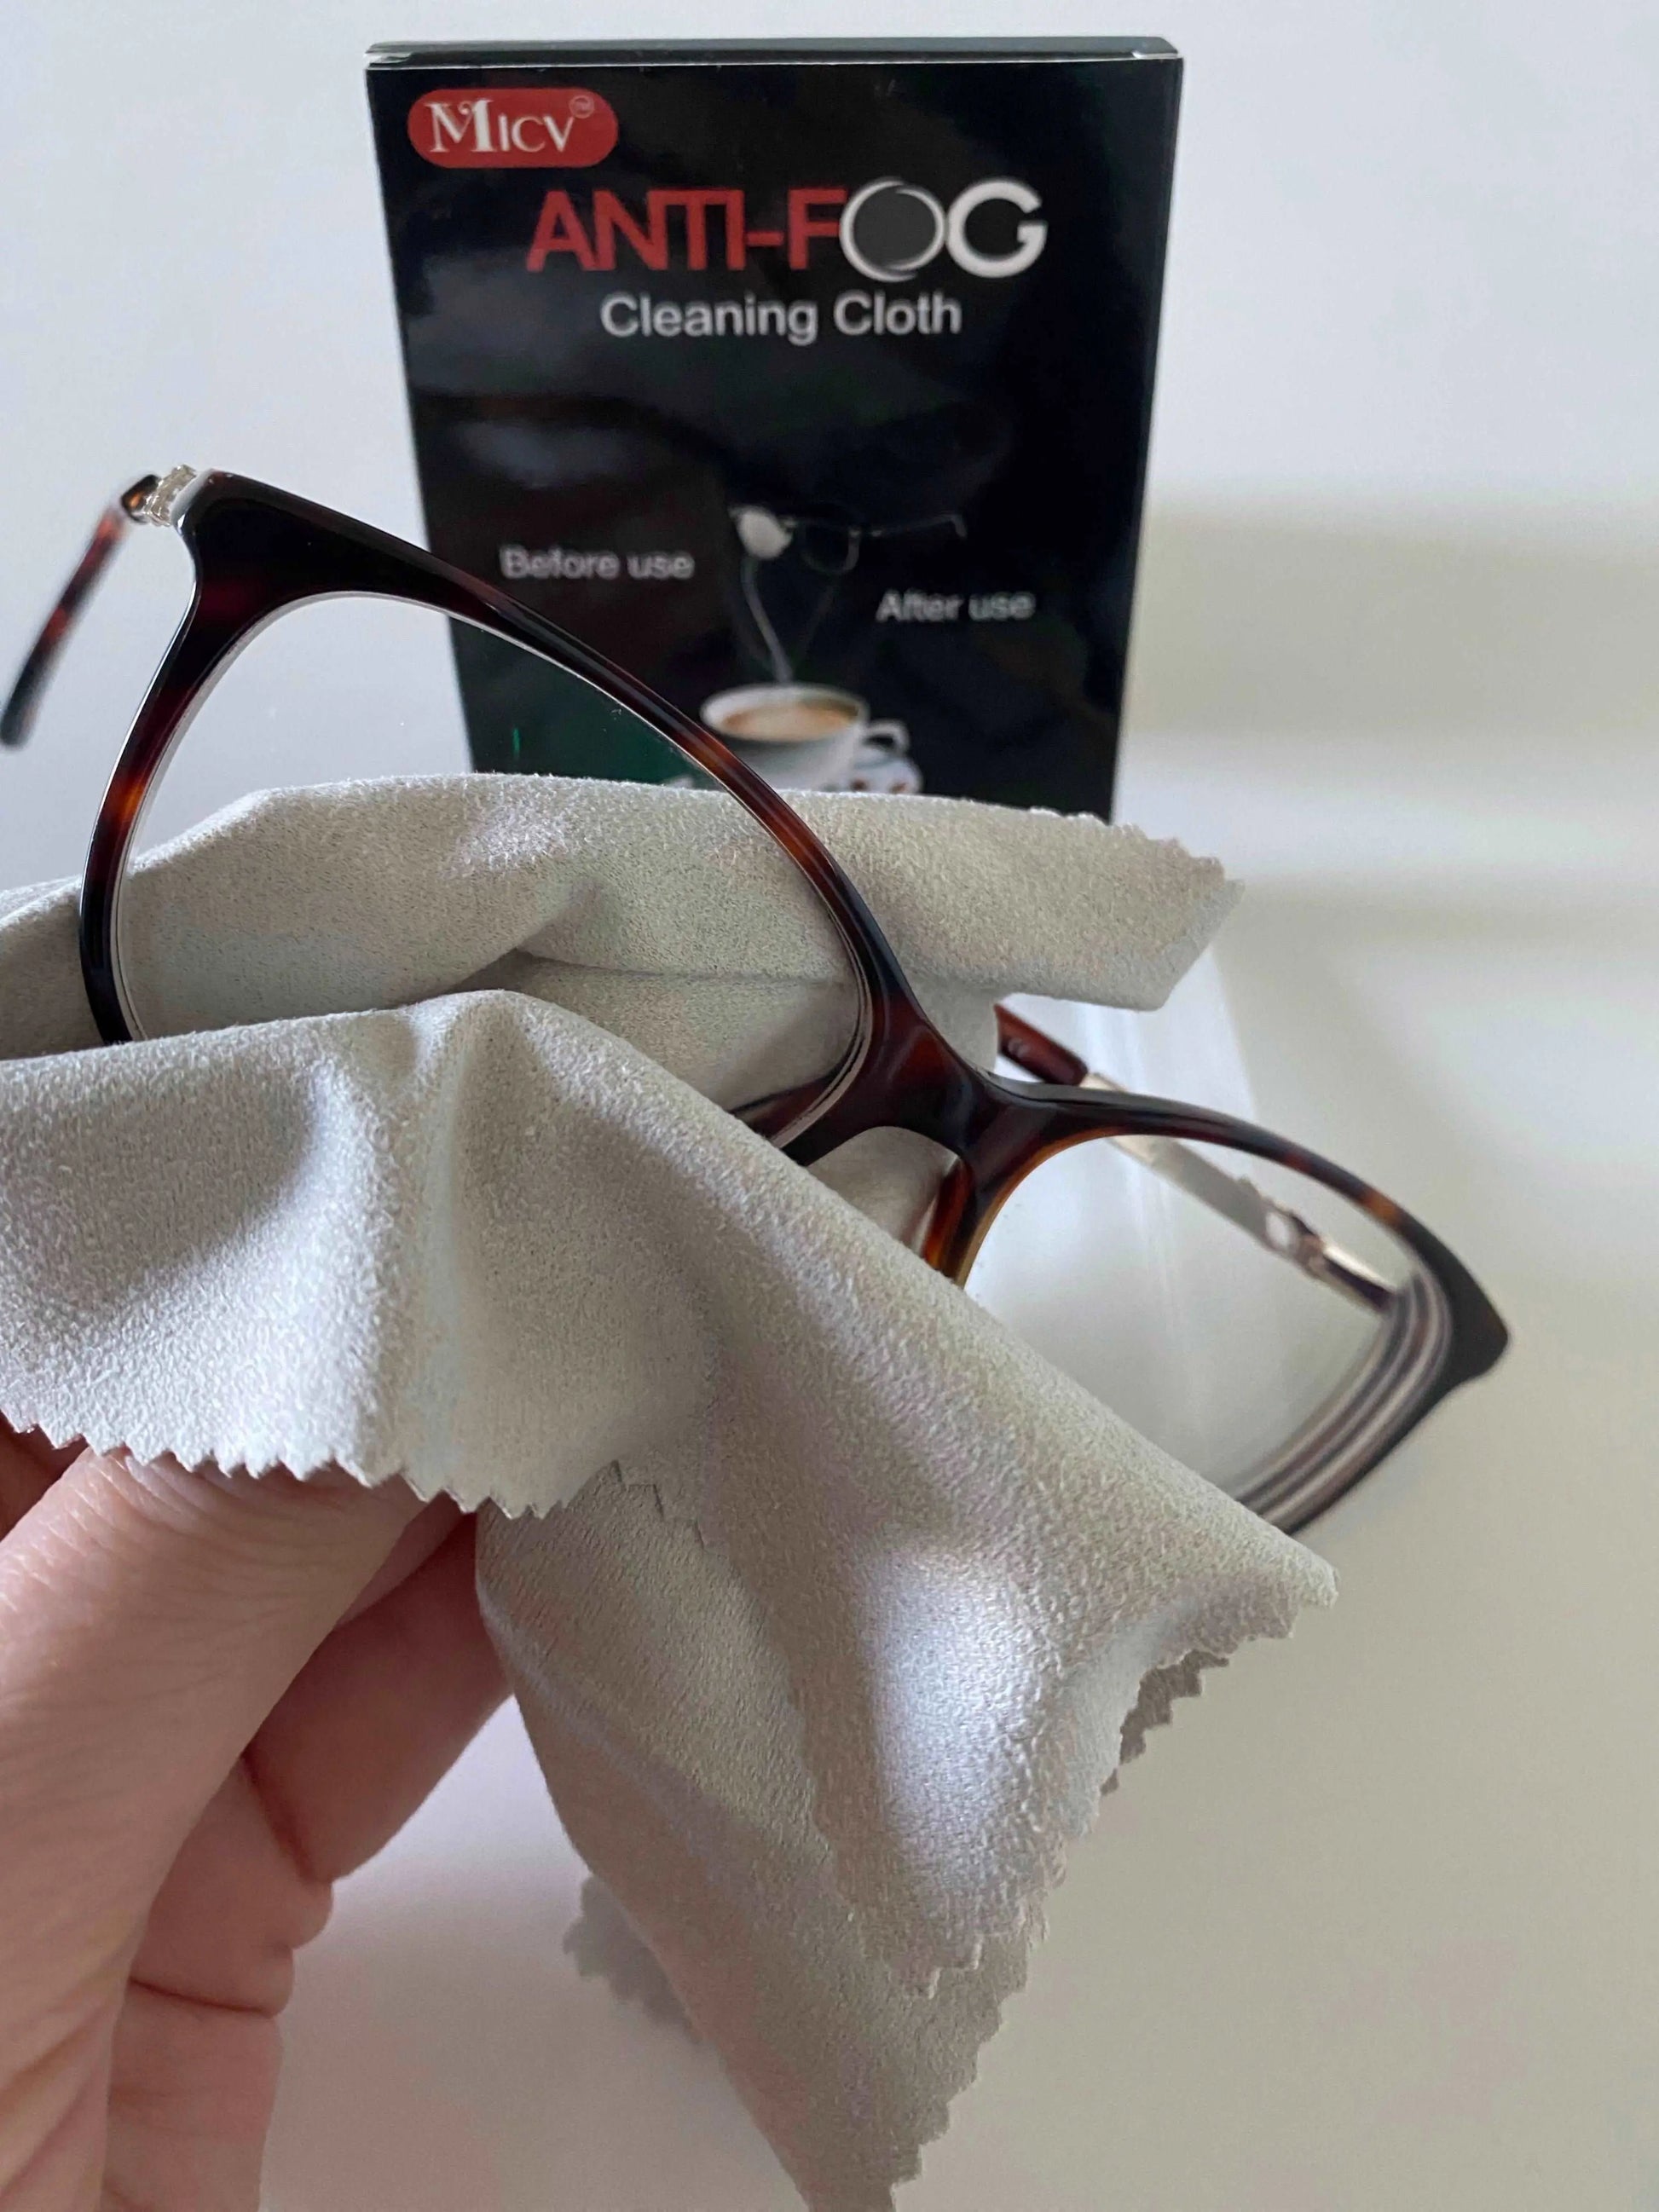 Cleaning glasses with anti fog cloth